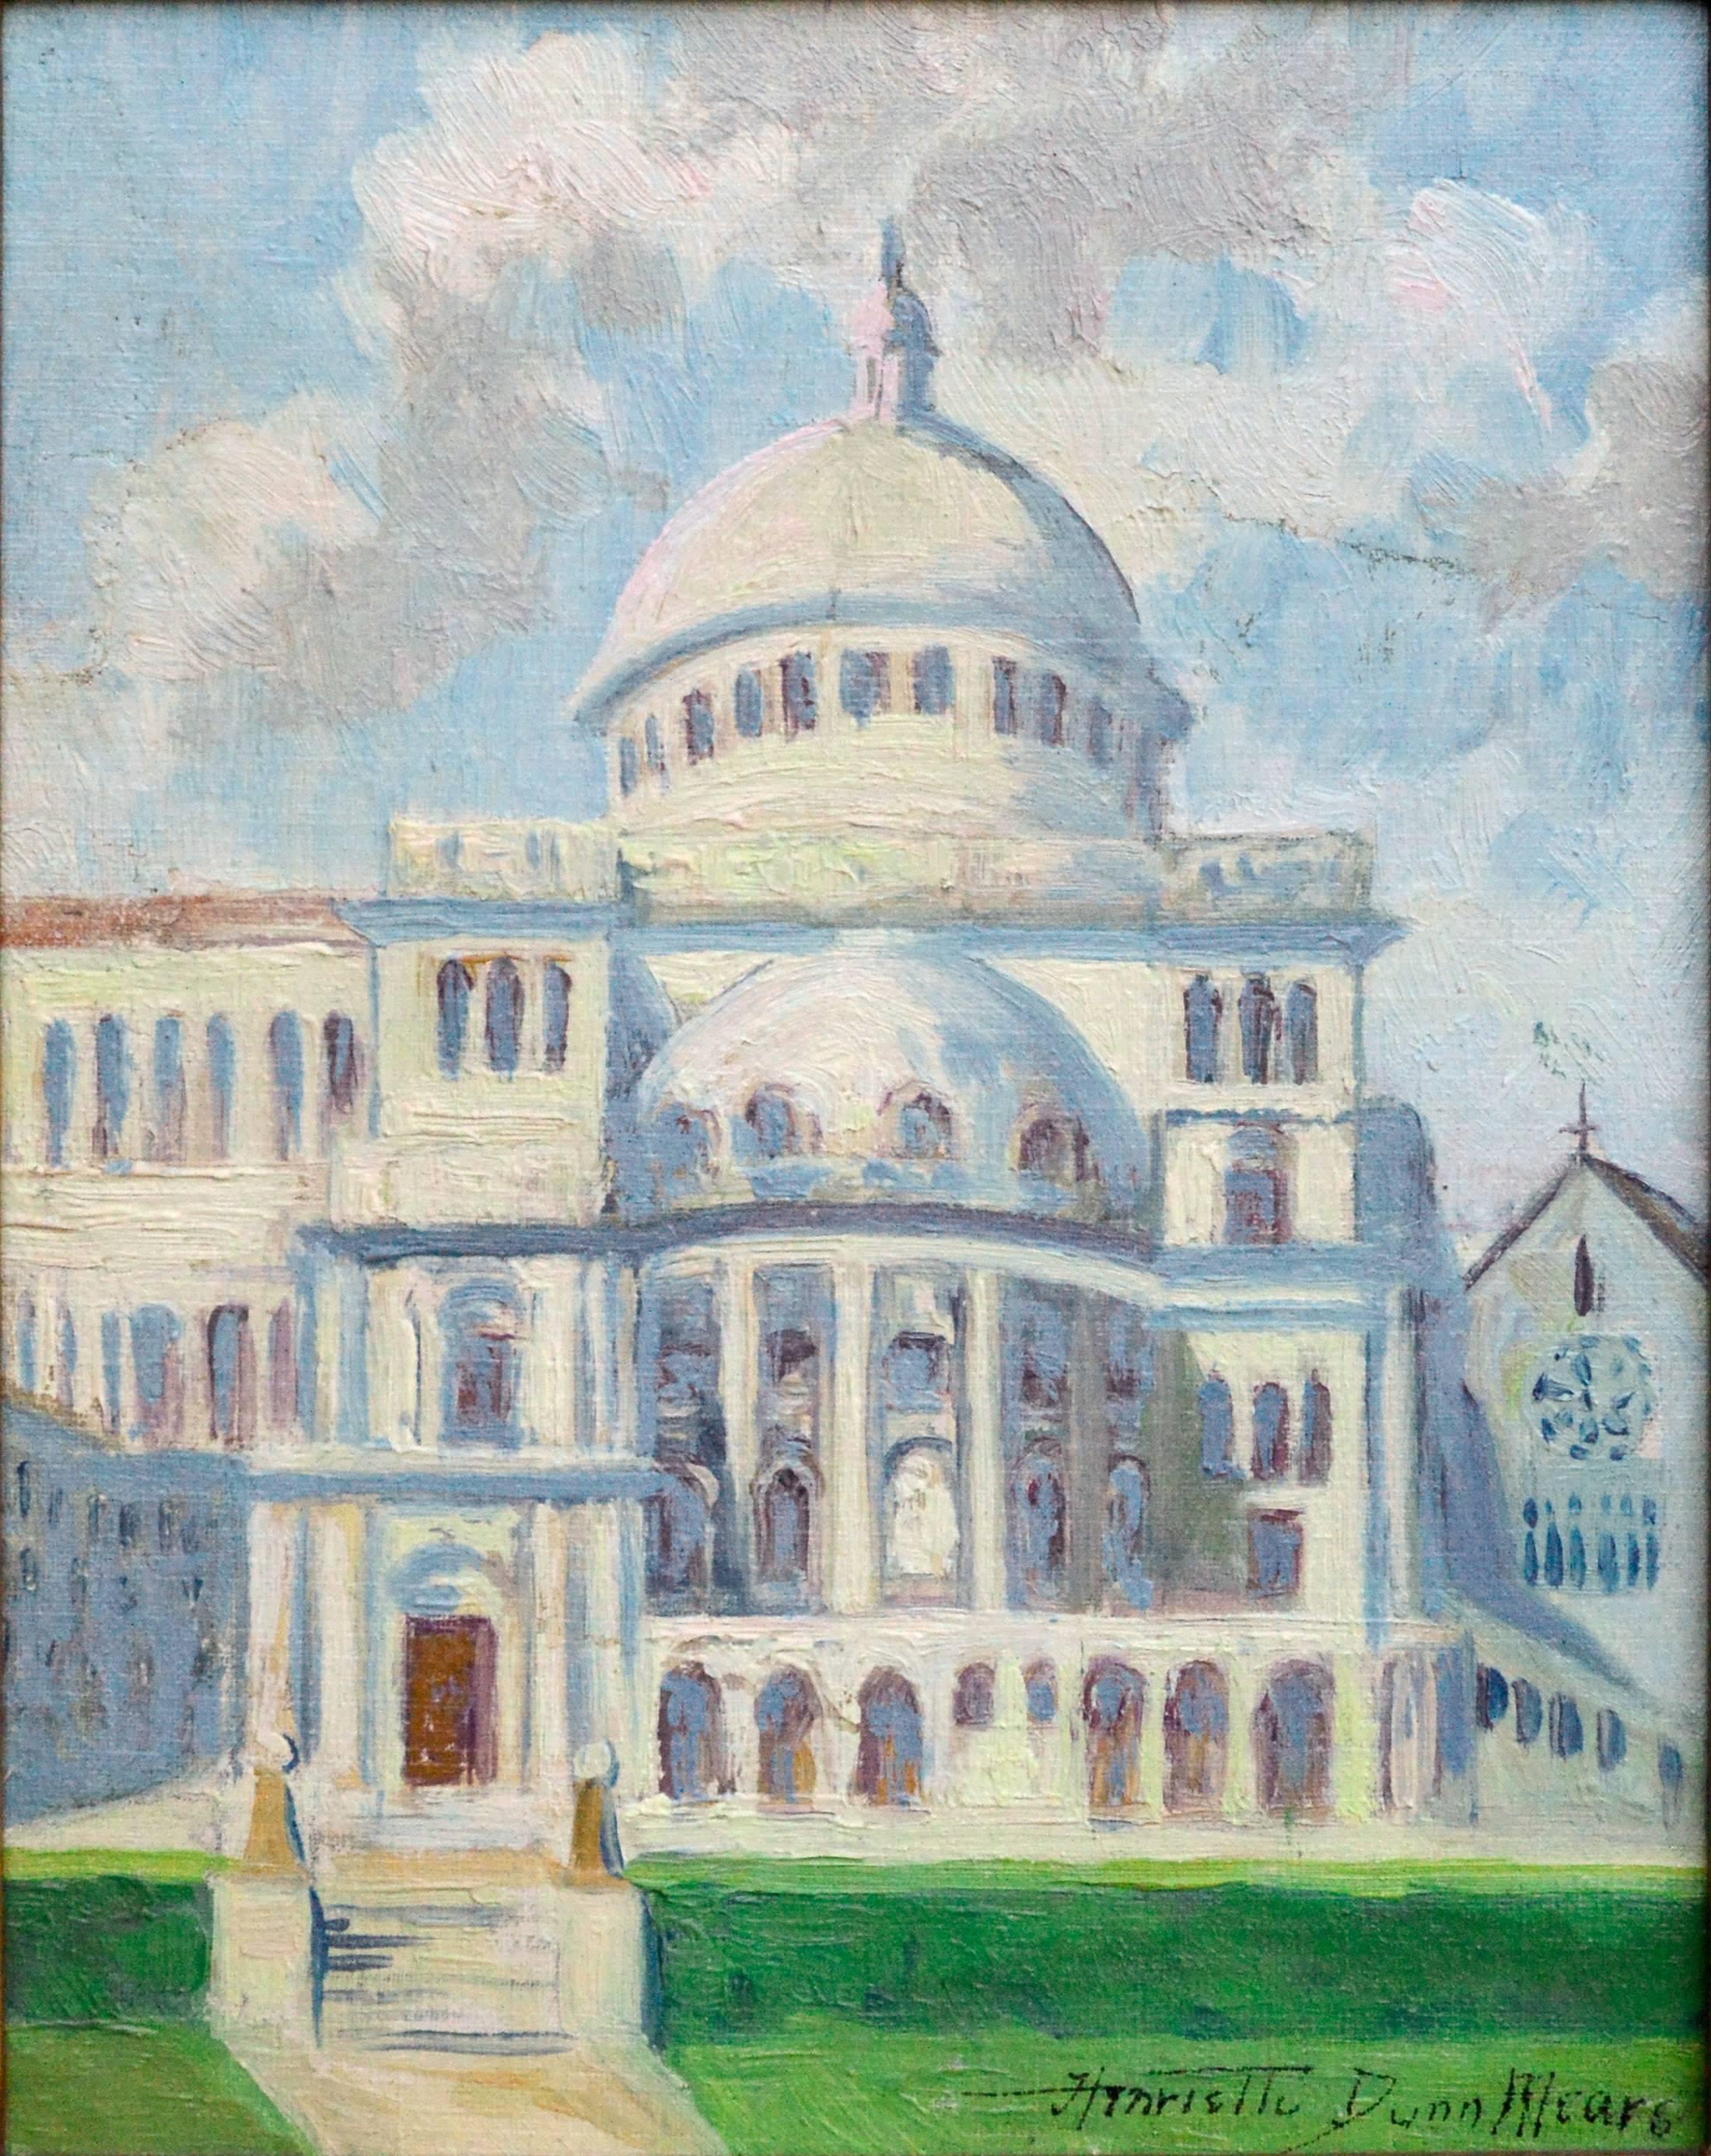 The First Church of Christ Scientist - Early 20th Century Boston Landscape  - Painting by Henrietta Dunn Mears